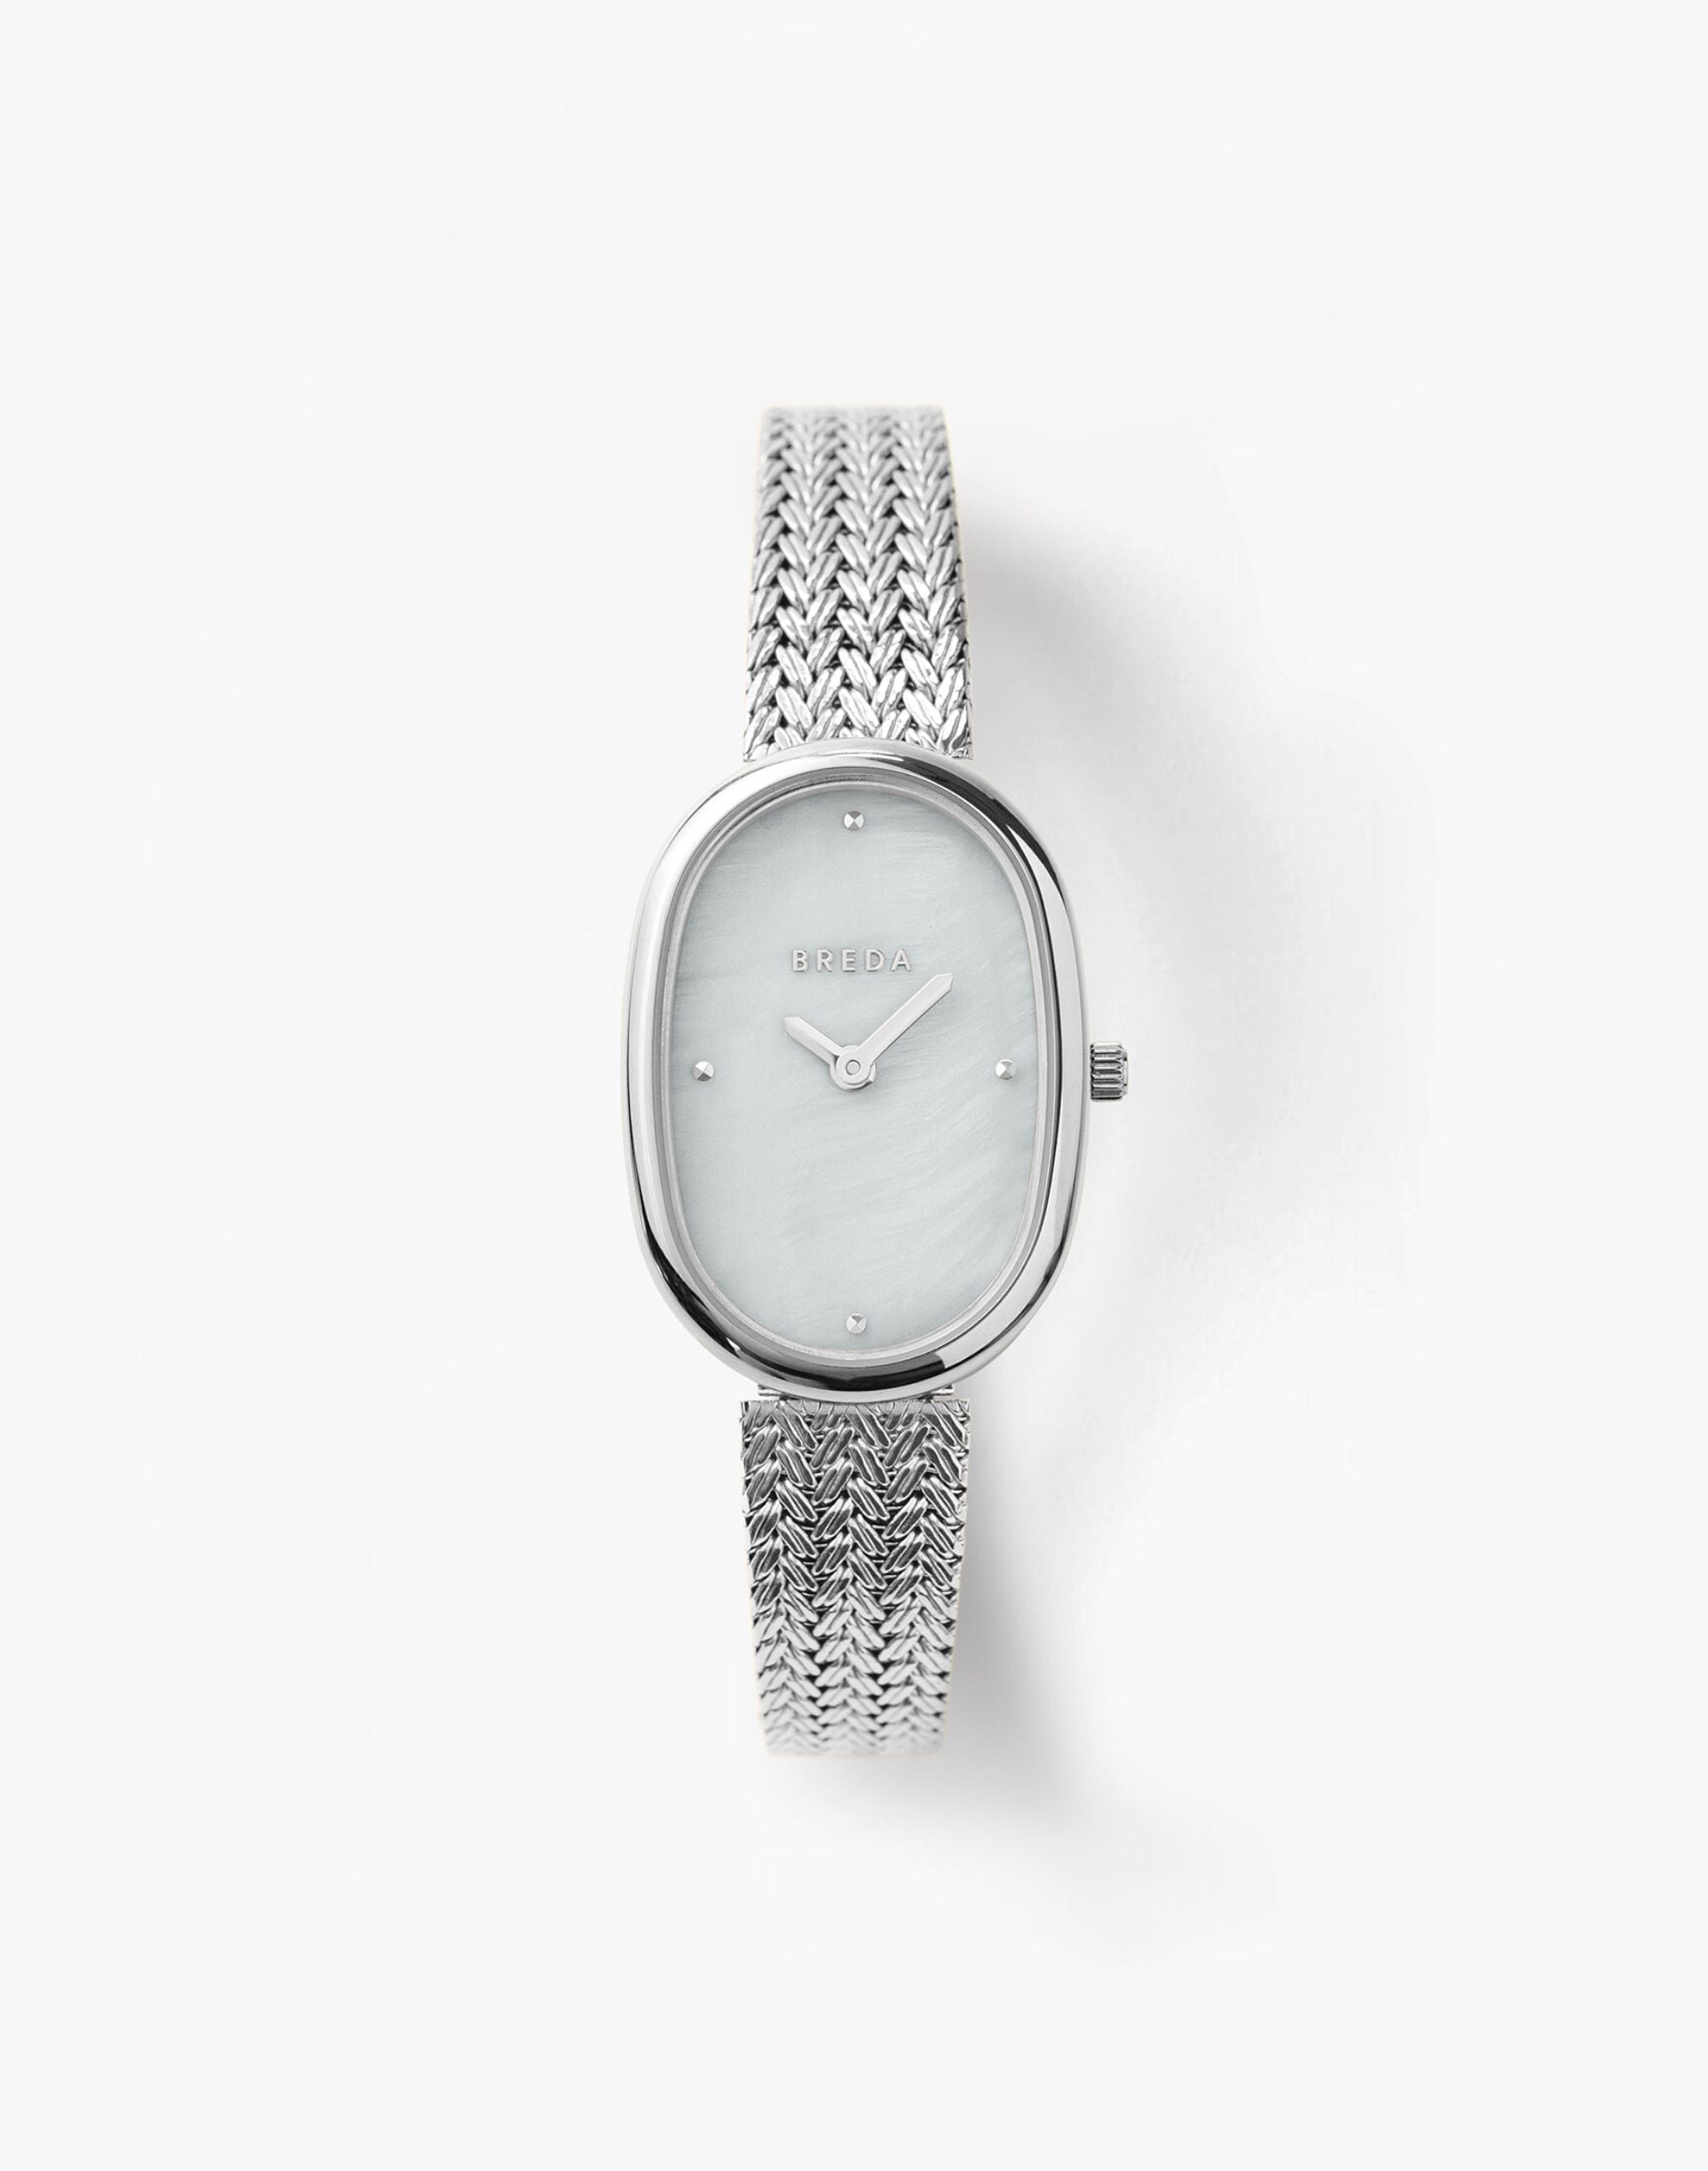 BREDA Jane Tethered Stainless Steel and Mesh Bracelet Watch, 23mm